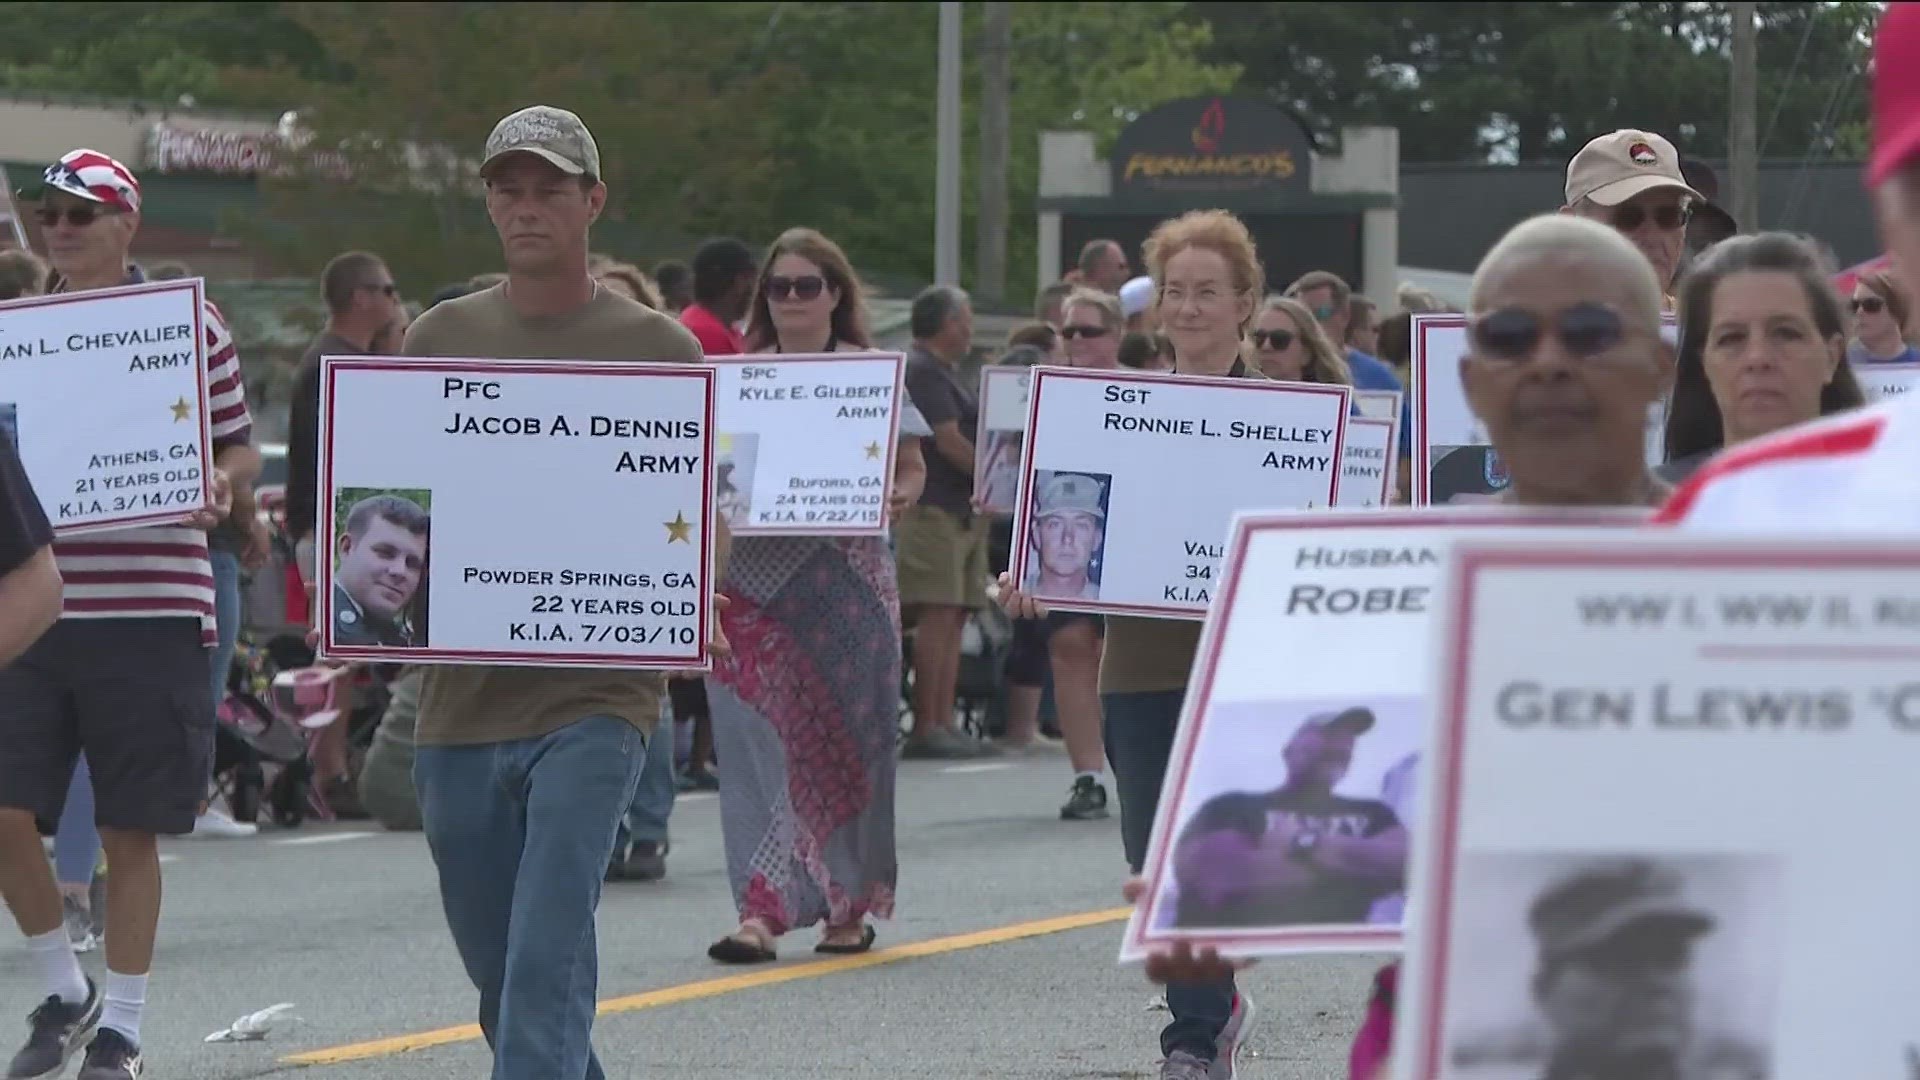 Each year, they carry signs displaying the names and pictures of over 300 fallen heroes.